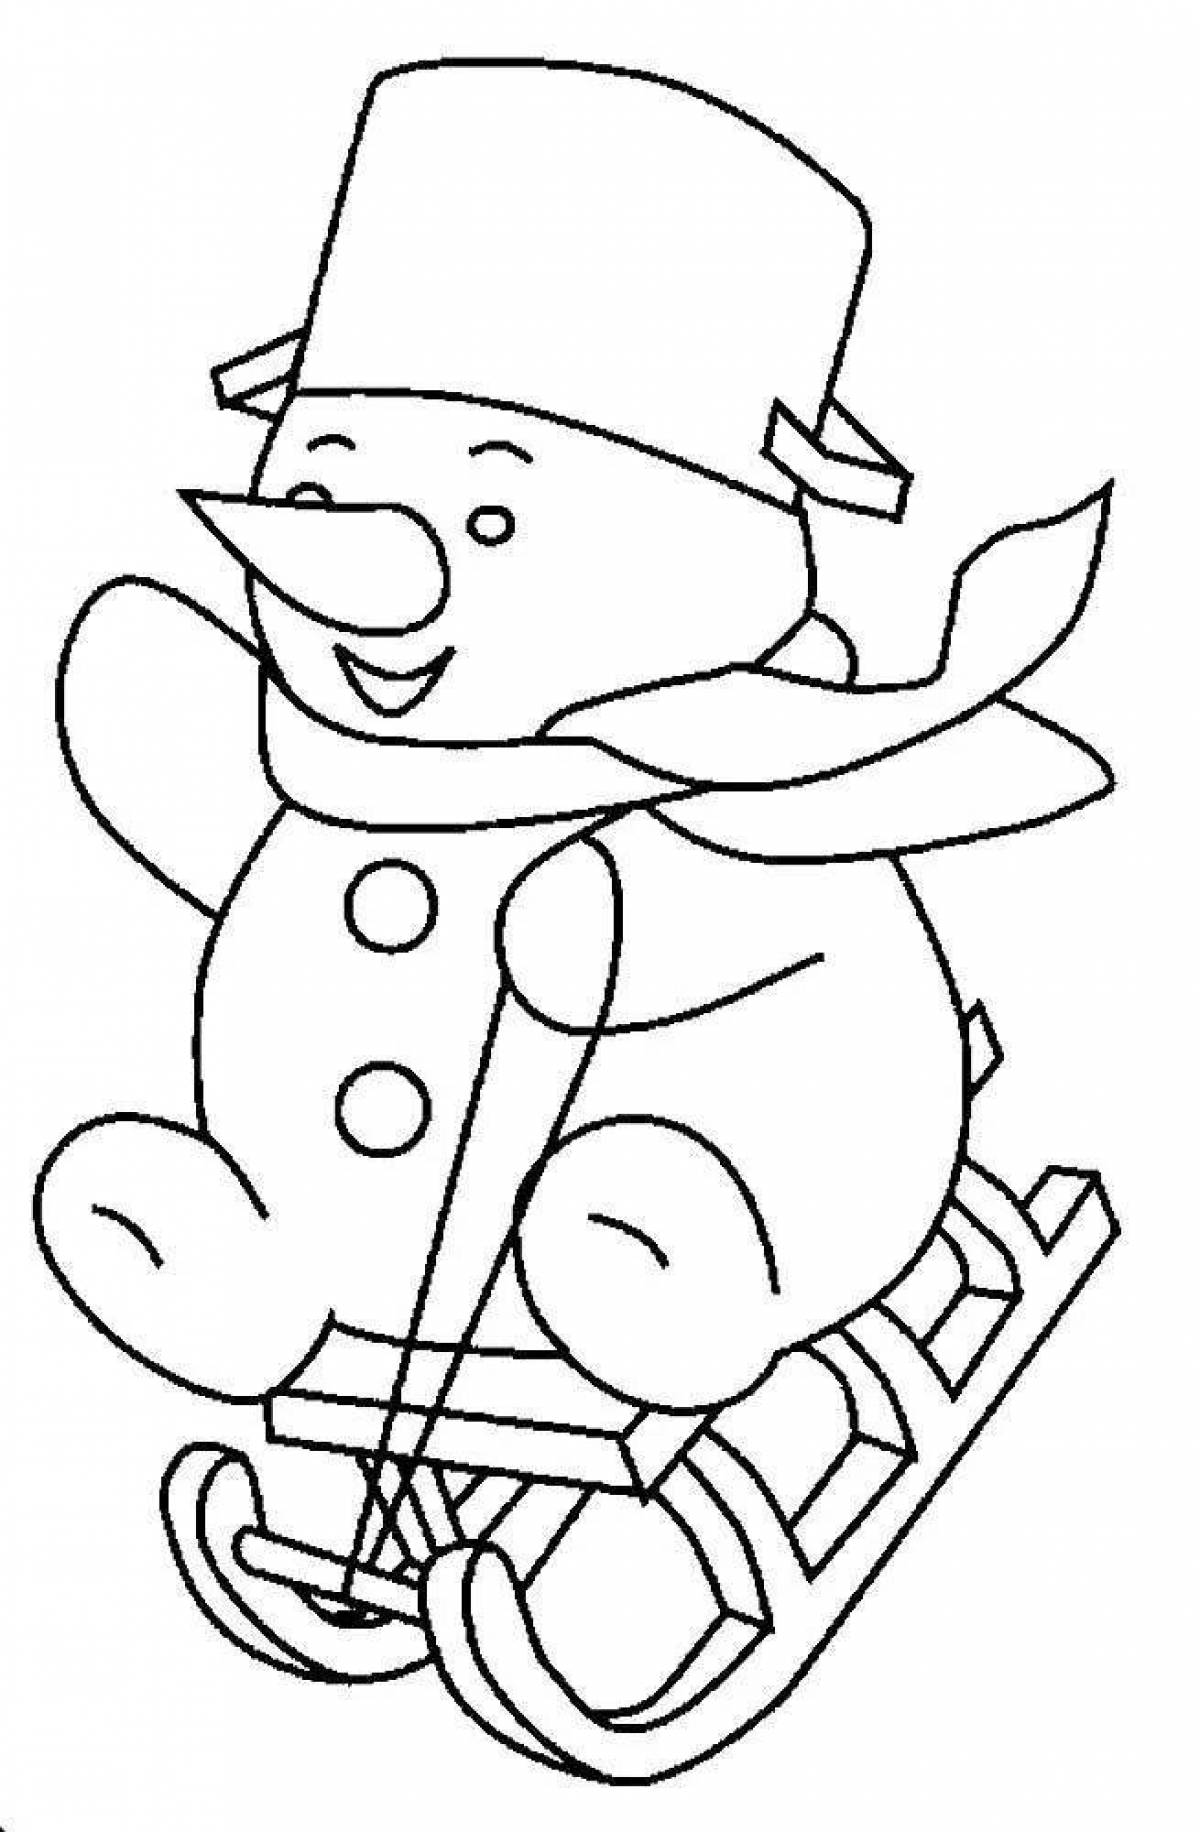 Coloring page energetic snowman on skis